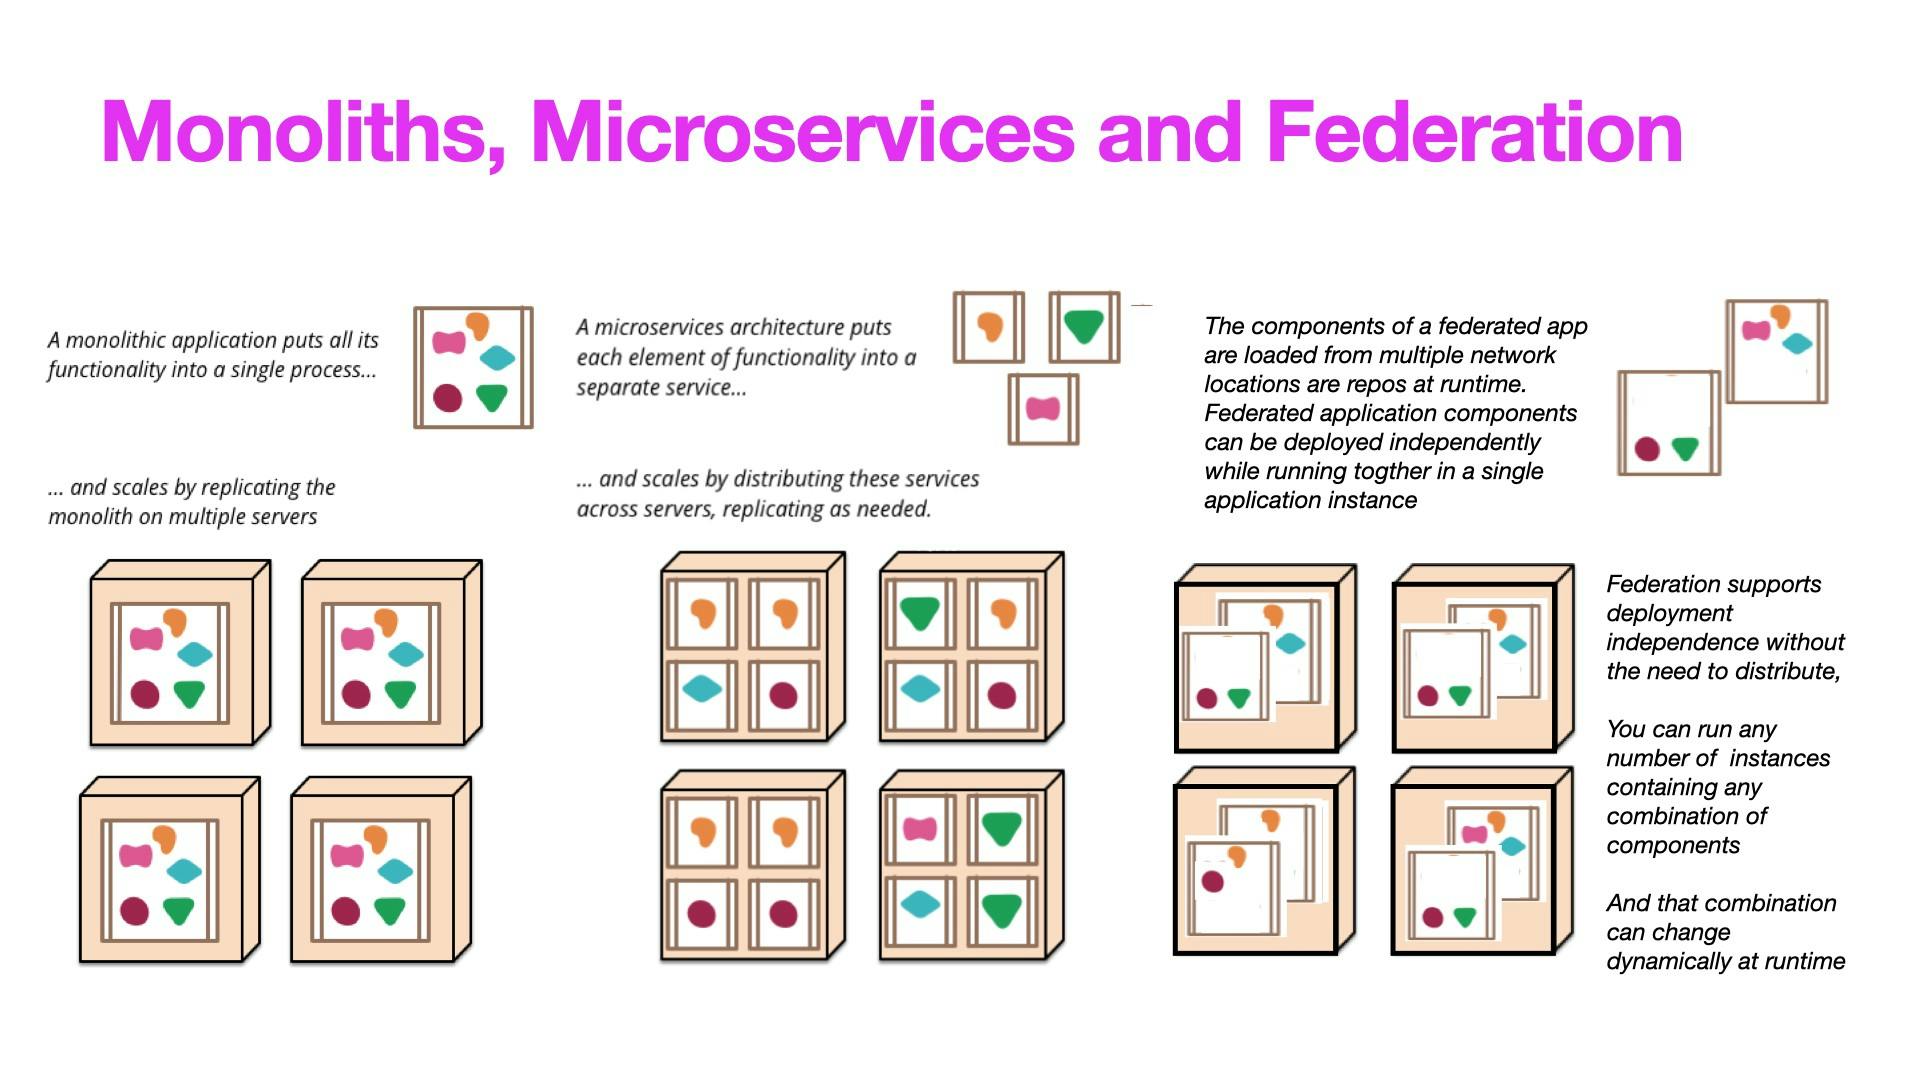 An image from martinfowler.com updated to include federated applications